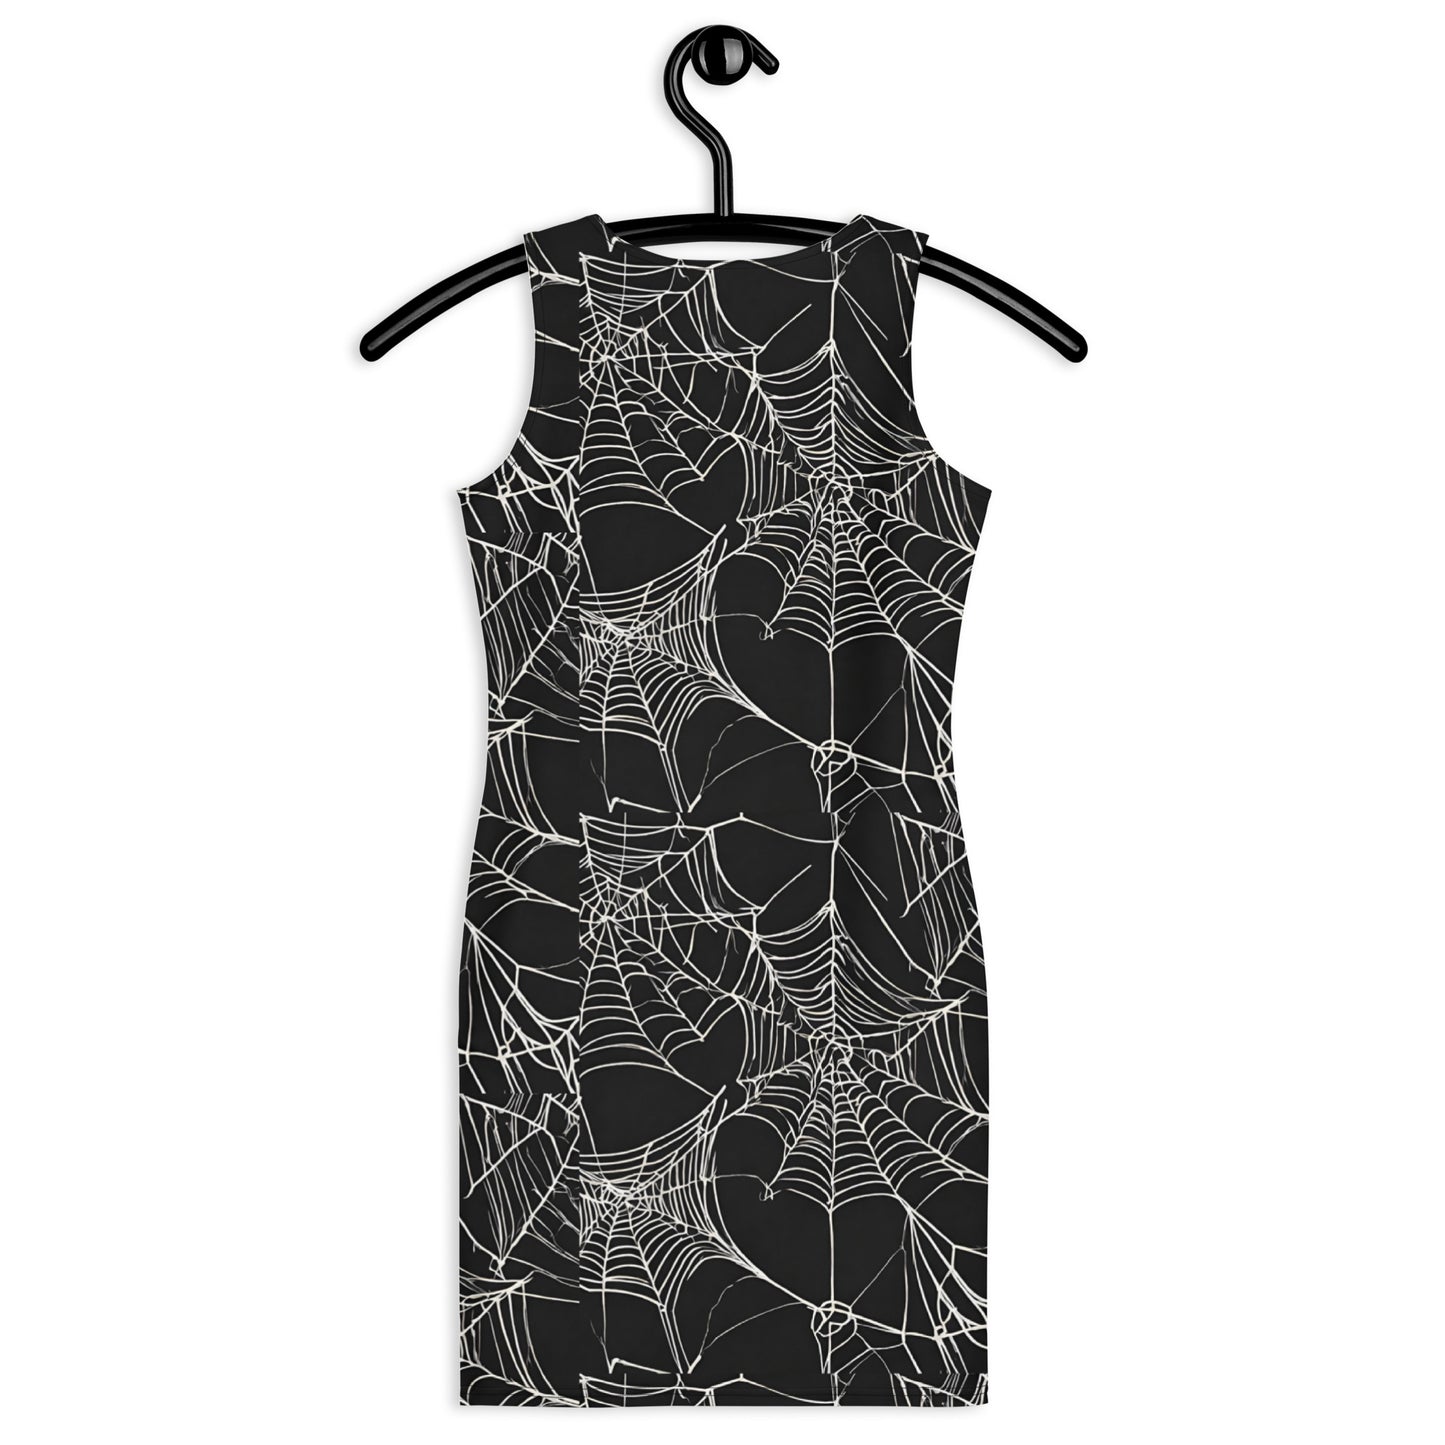 WEB OF LIES FITTED DRESS